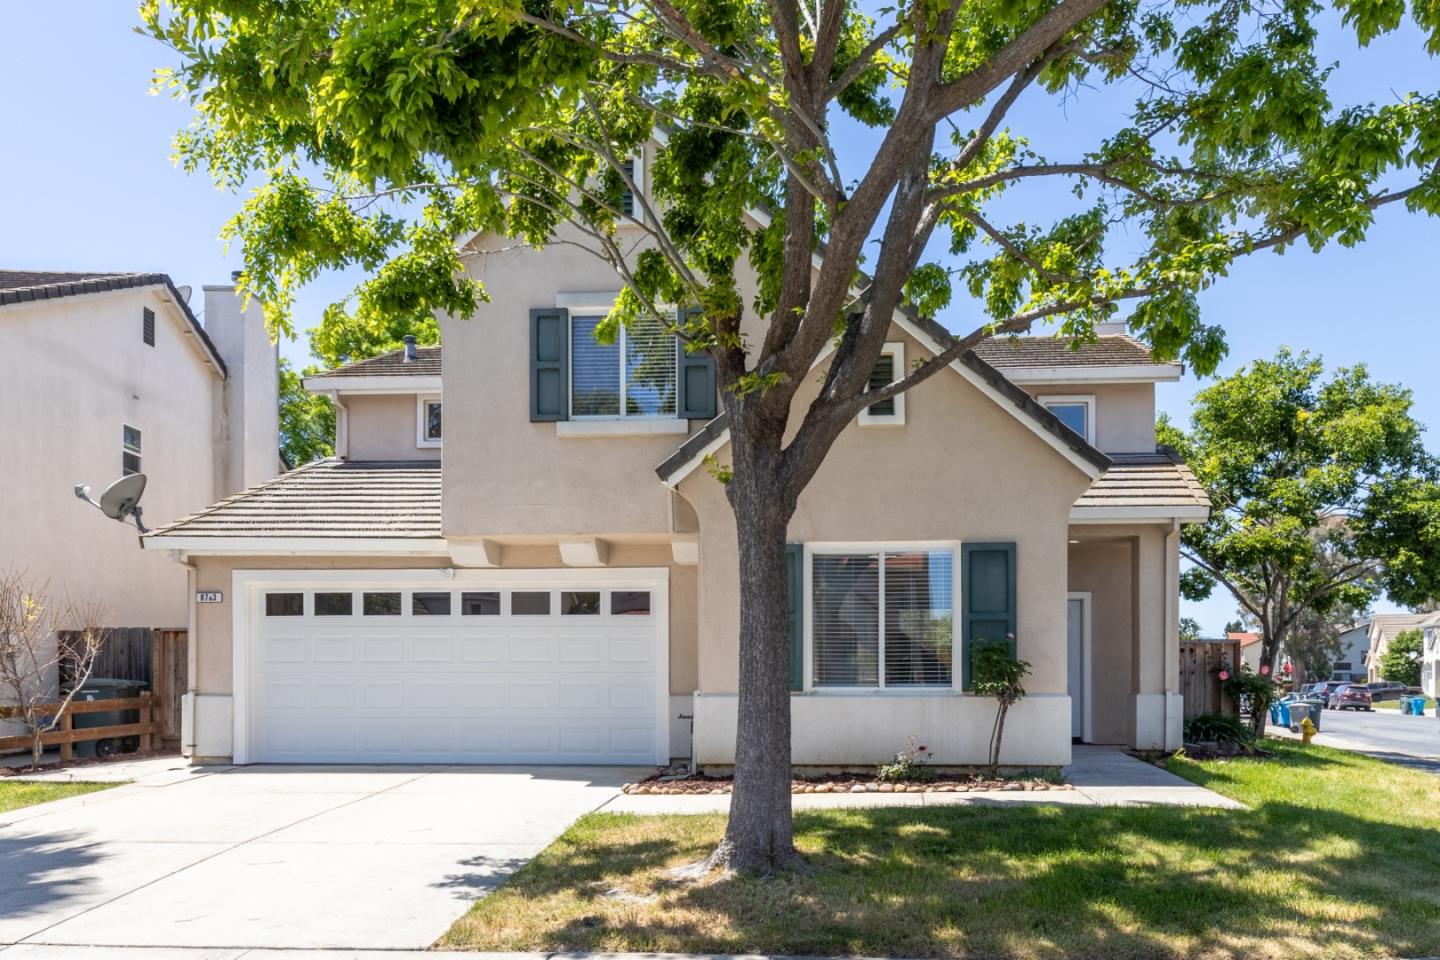 Photo of 8783 Floral St in Gilroy, CA